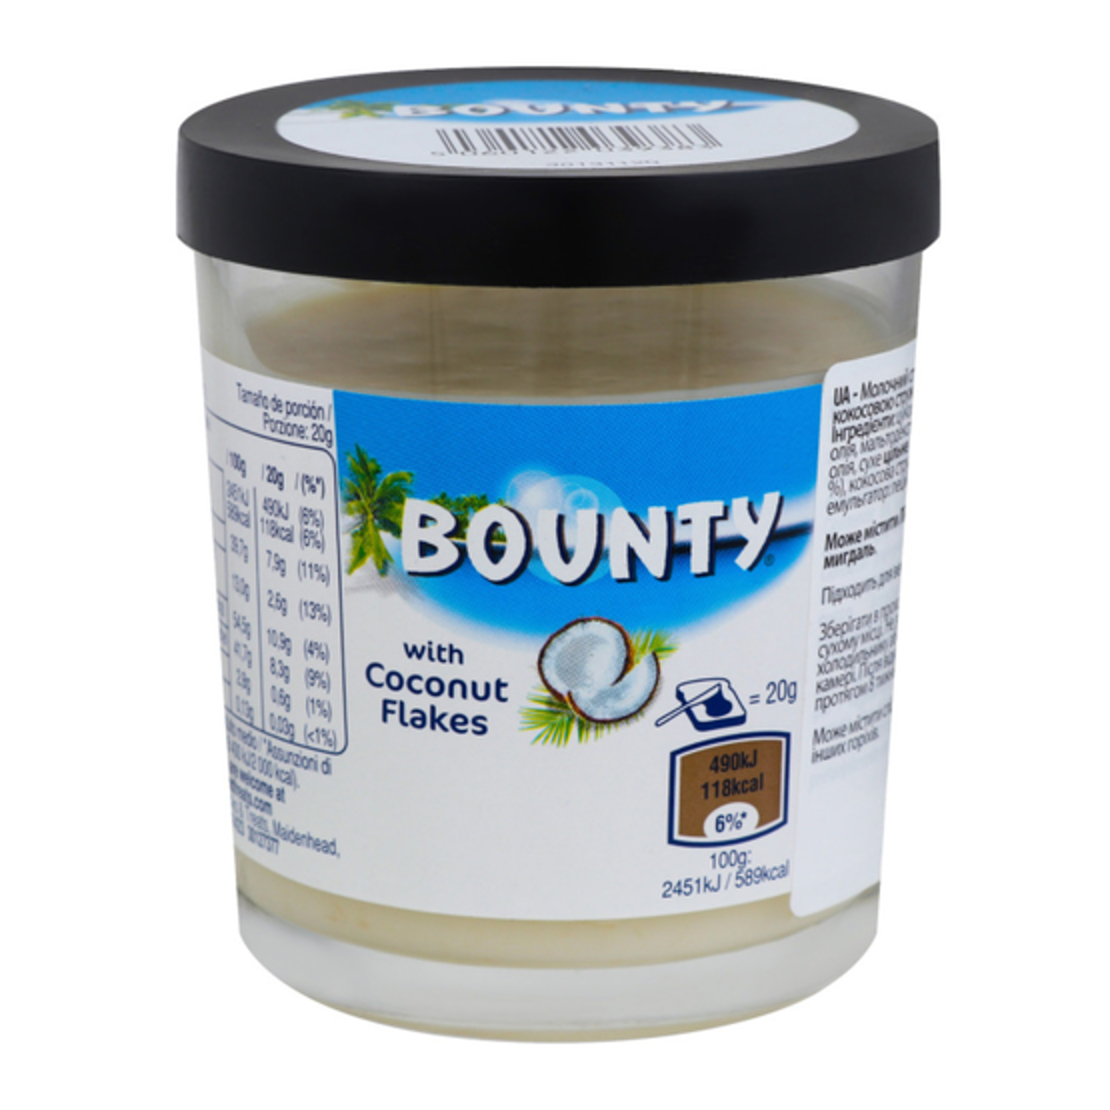 Bounty with Coconut Flakes 